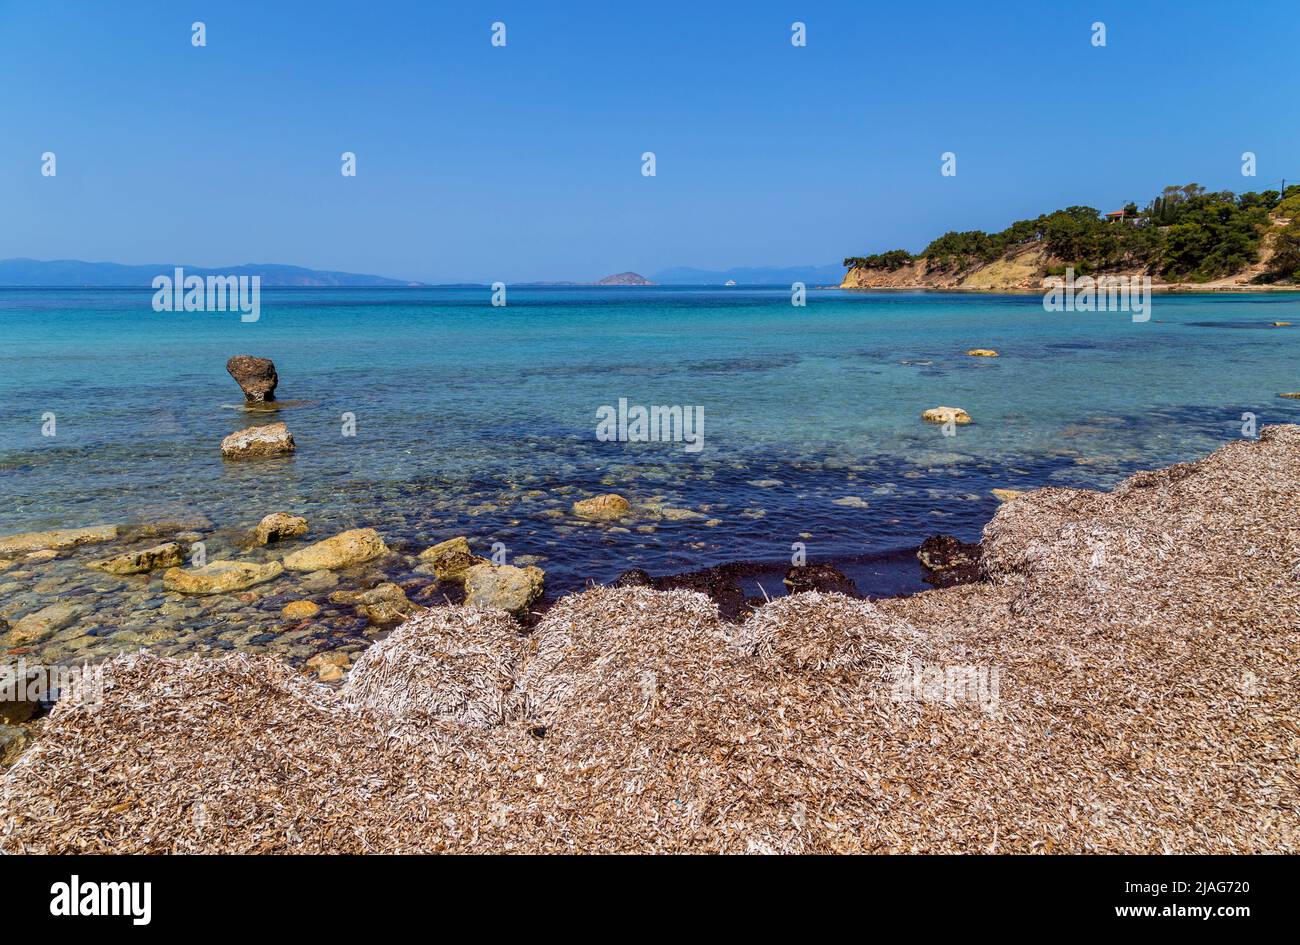 The wild coast of Aegina island with clear and blue waters of Mediterranean sea in the Saronic gulf, Greece. Stock Photo